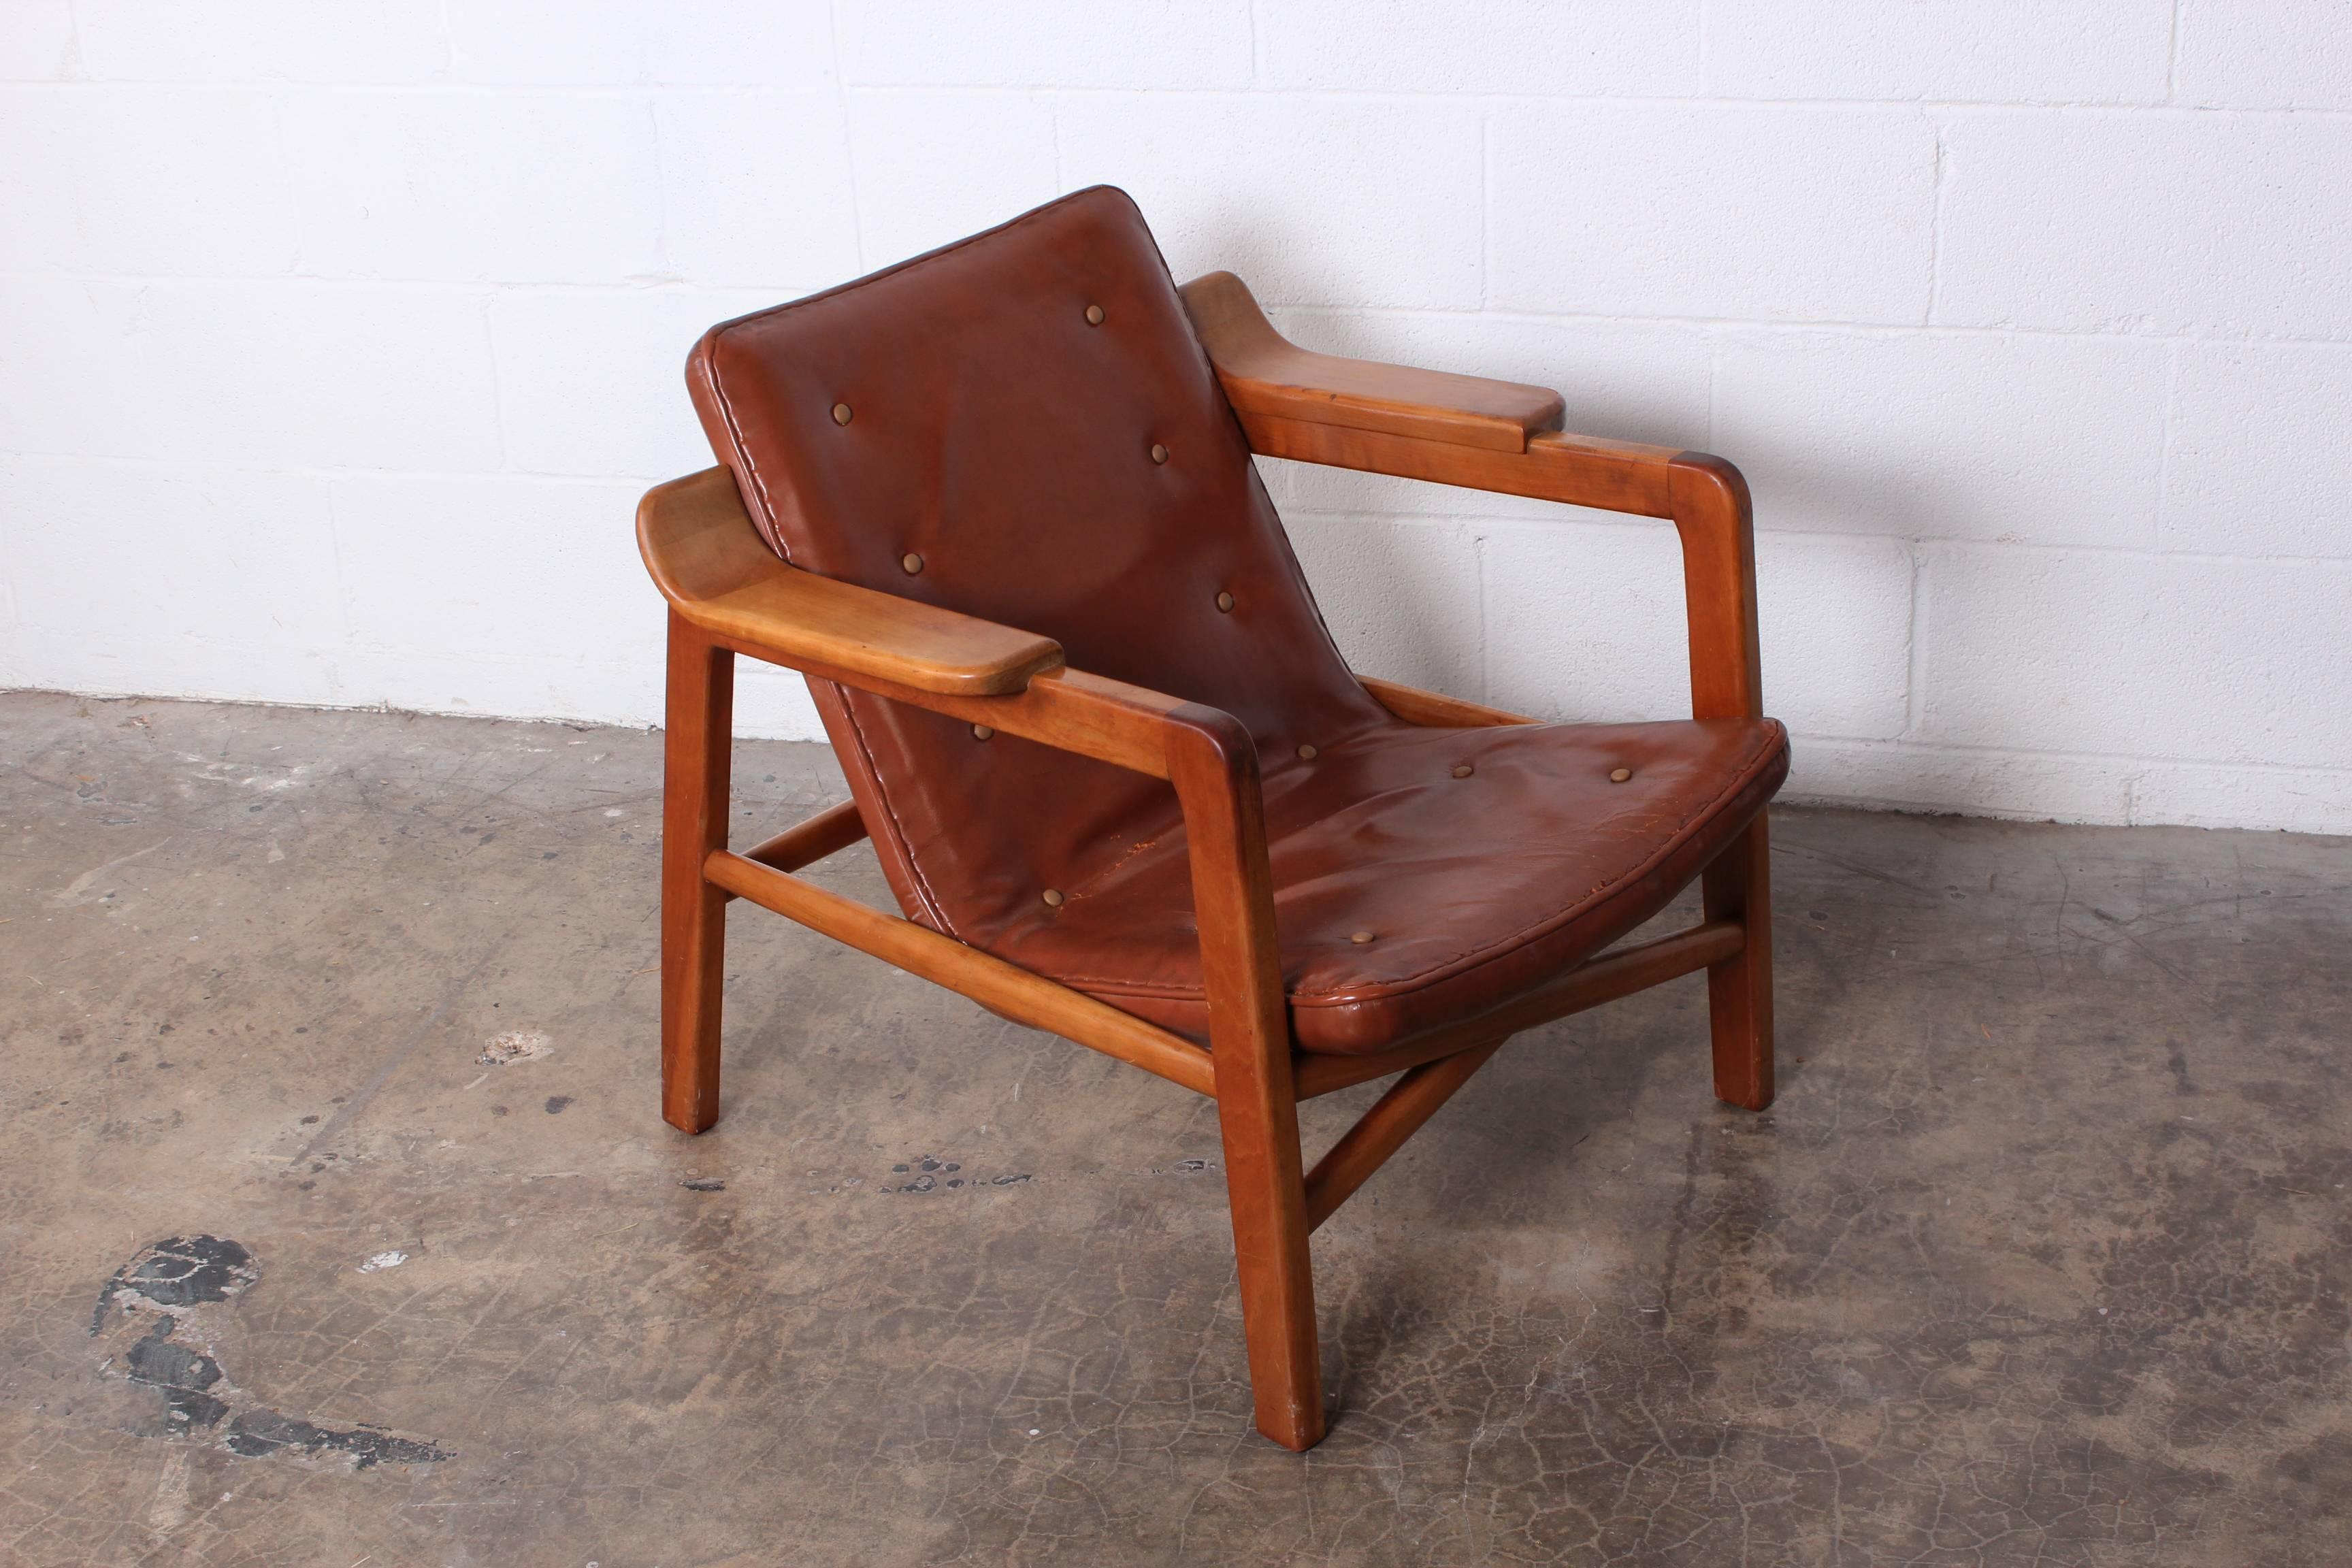 Tove & Edvard Kindt-Larsen 'Fireplace' Lounge Chair in Original Leather 1